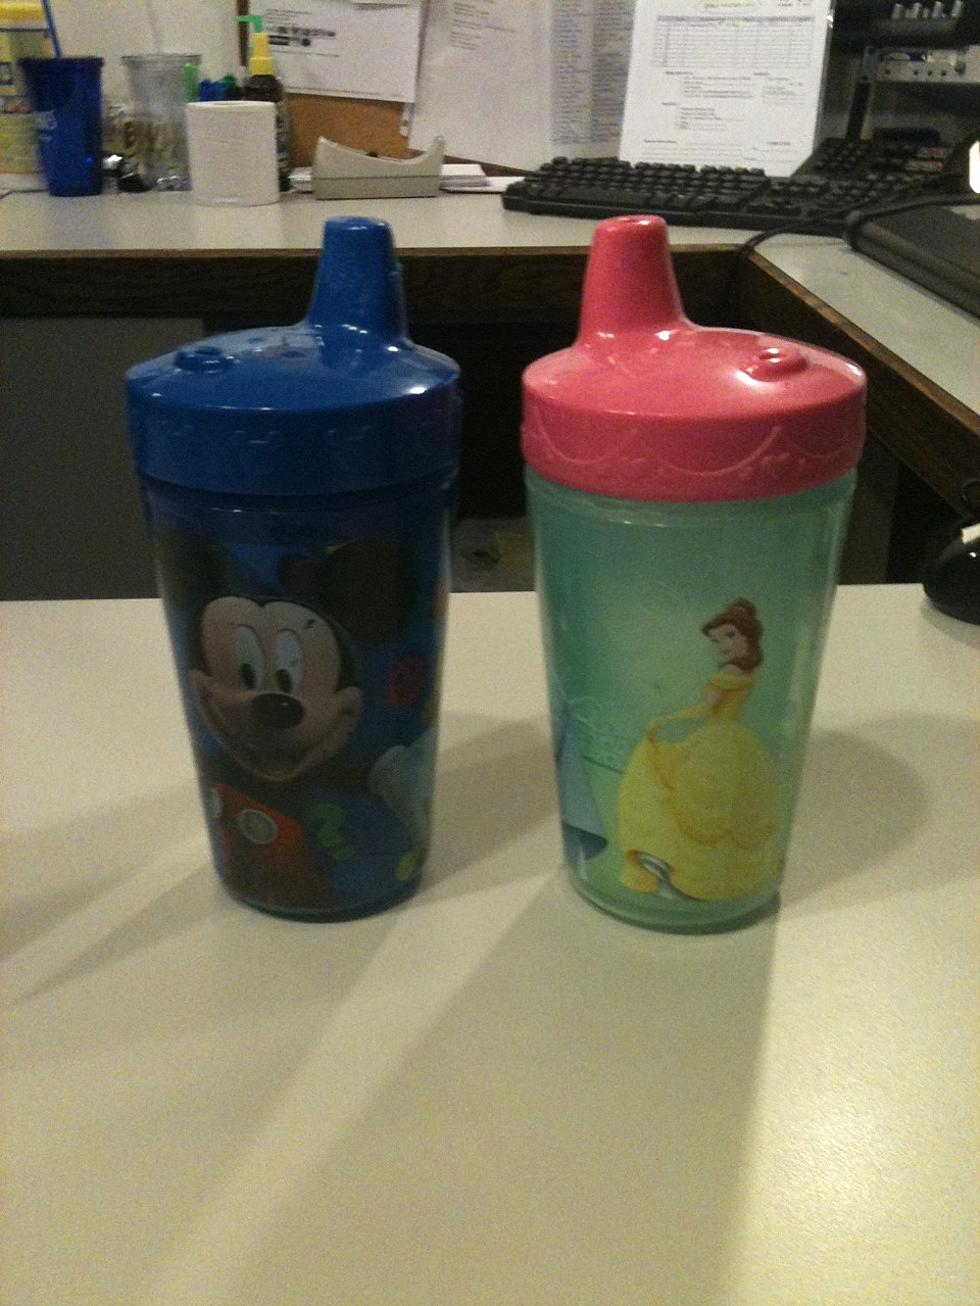 Today is National Drink Coffee at the Office from a Sippy Cup Day